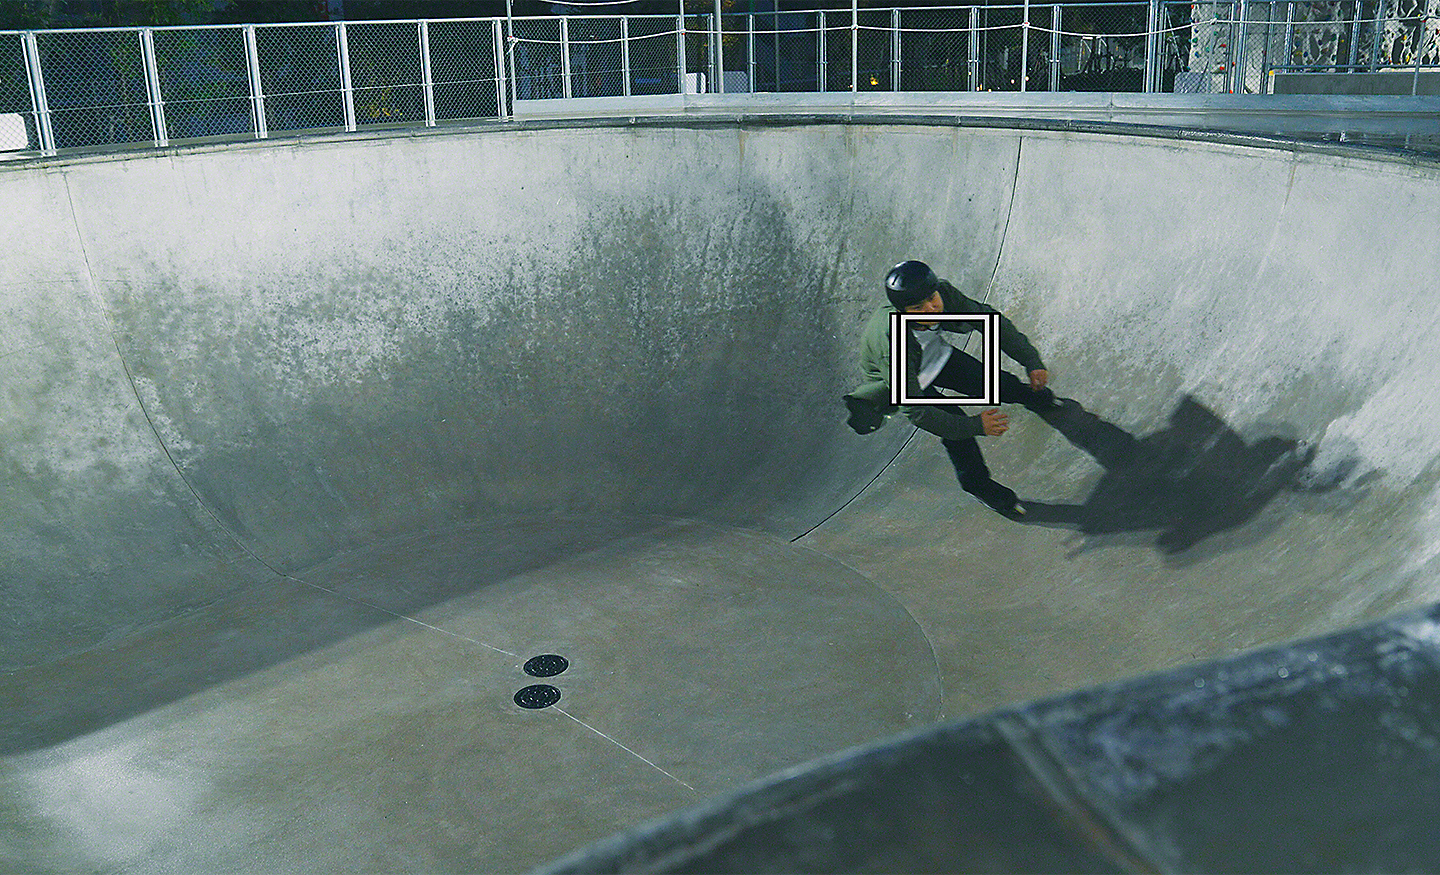 Roller blader skating in a disused swimming pool, overlaid with a white square for Object Tracking